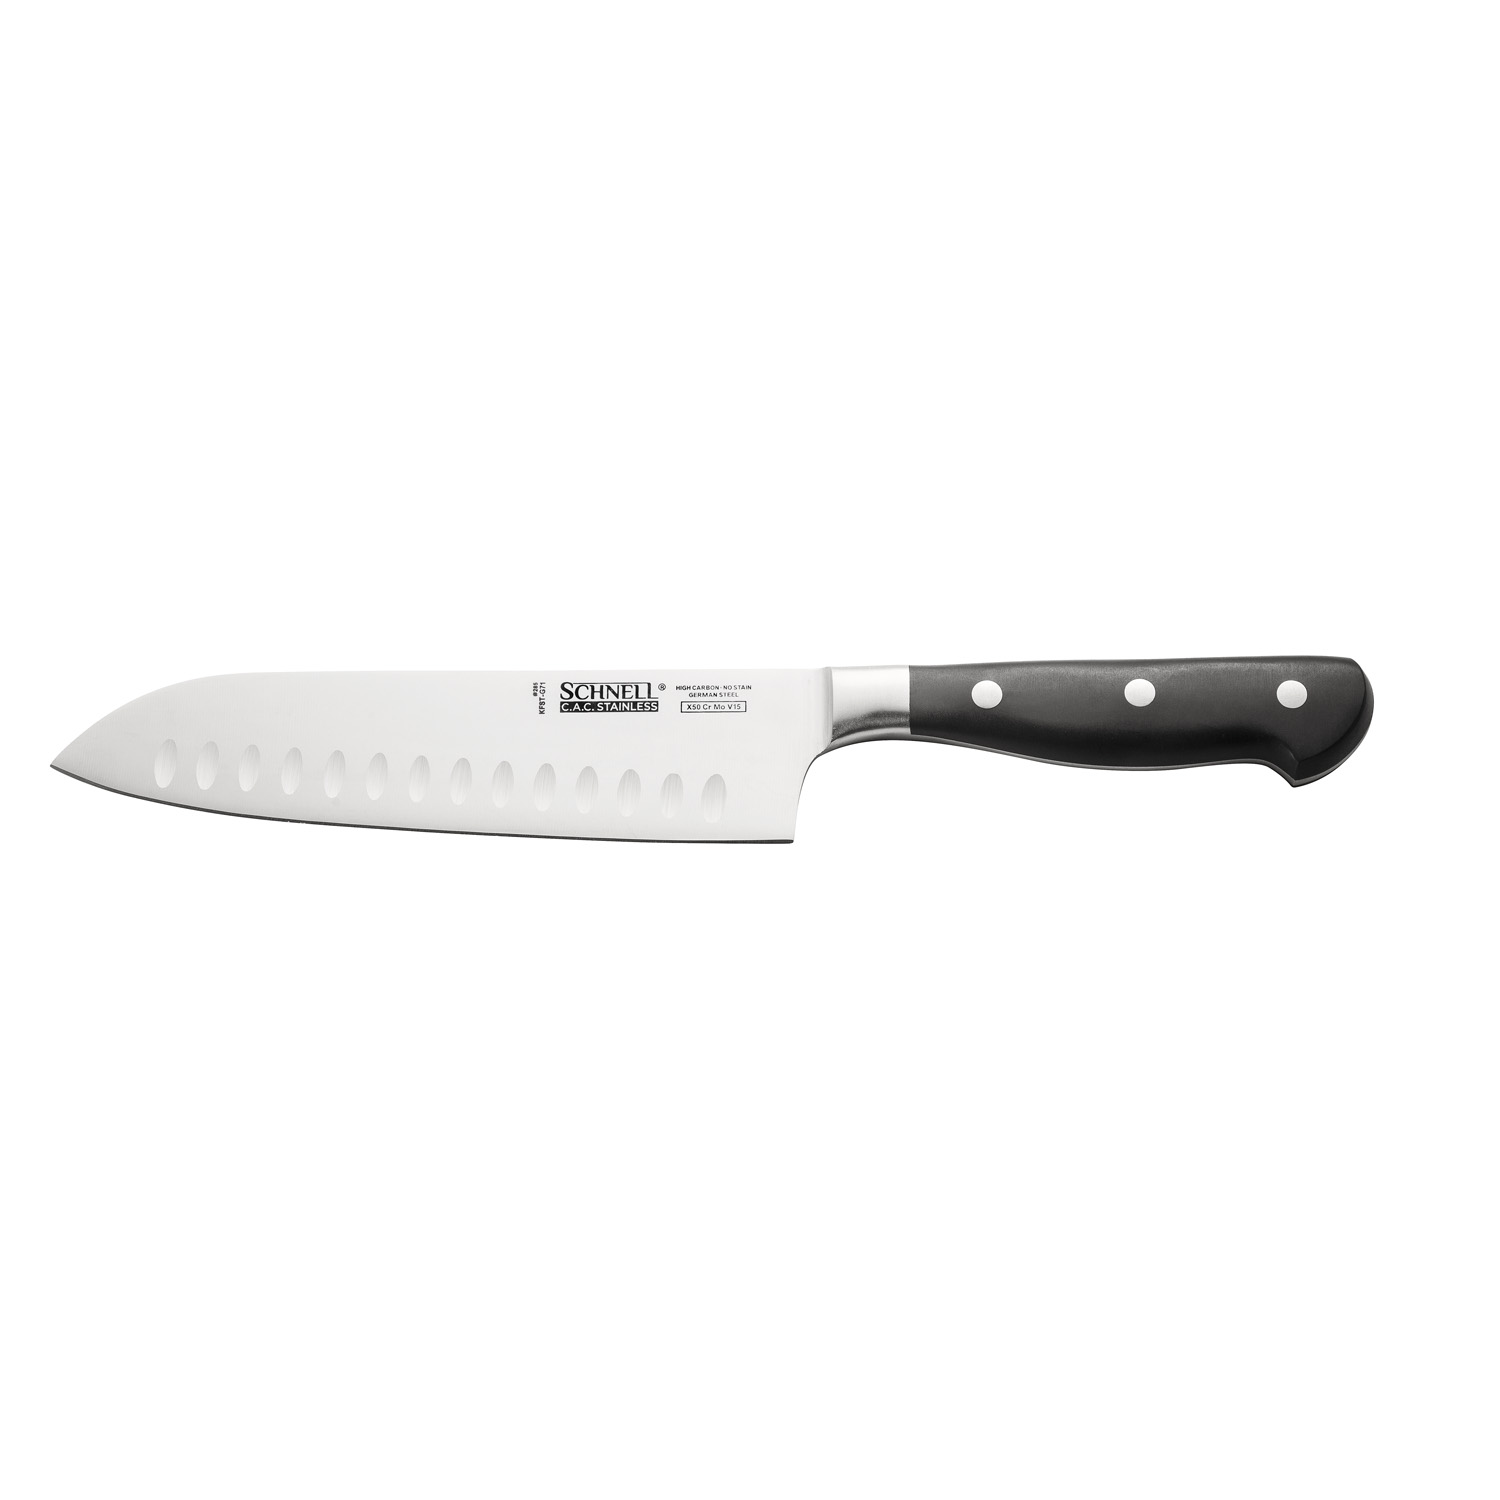 CAC China KFST-G71 Schnell Santoku Knife with Granton Edge 7-1/4"